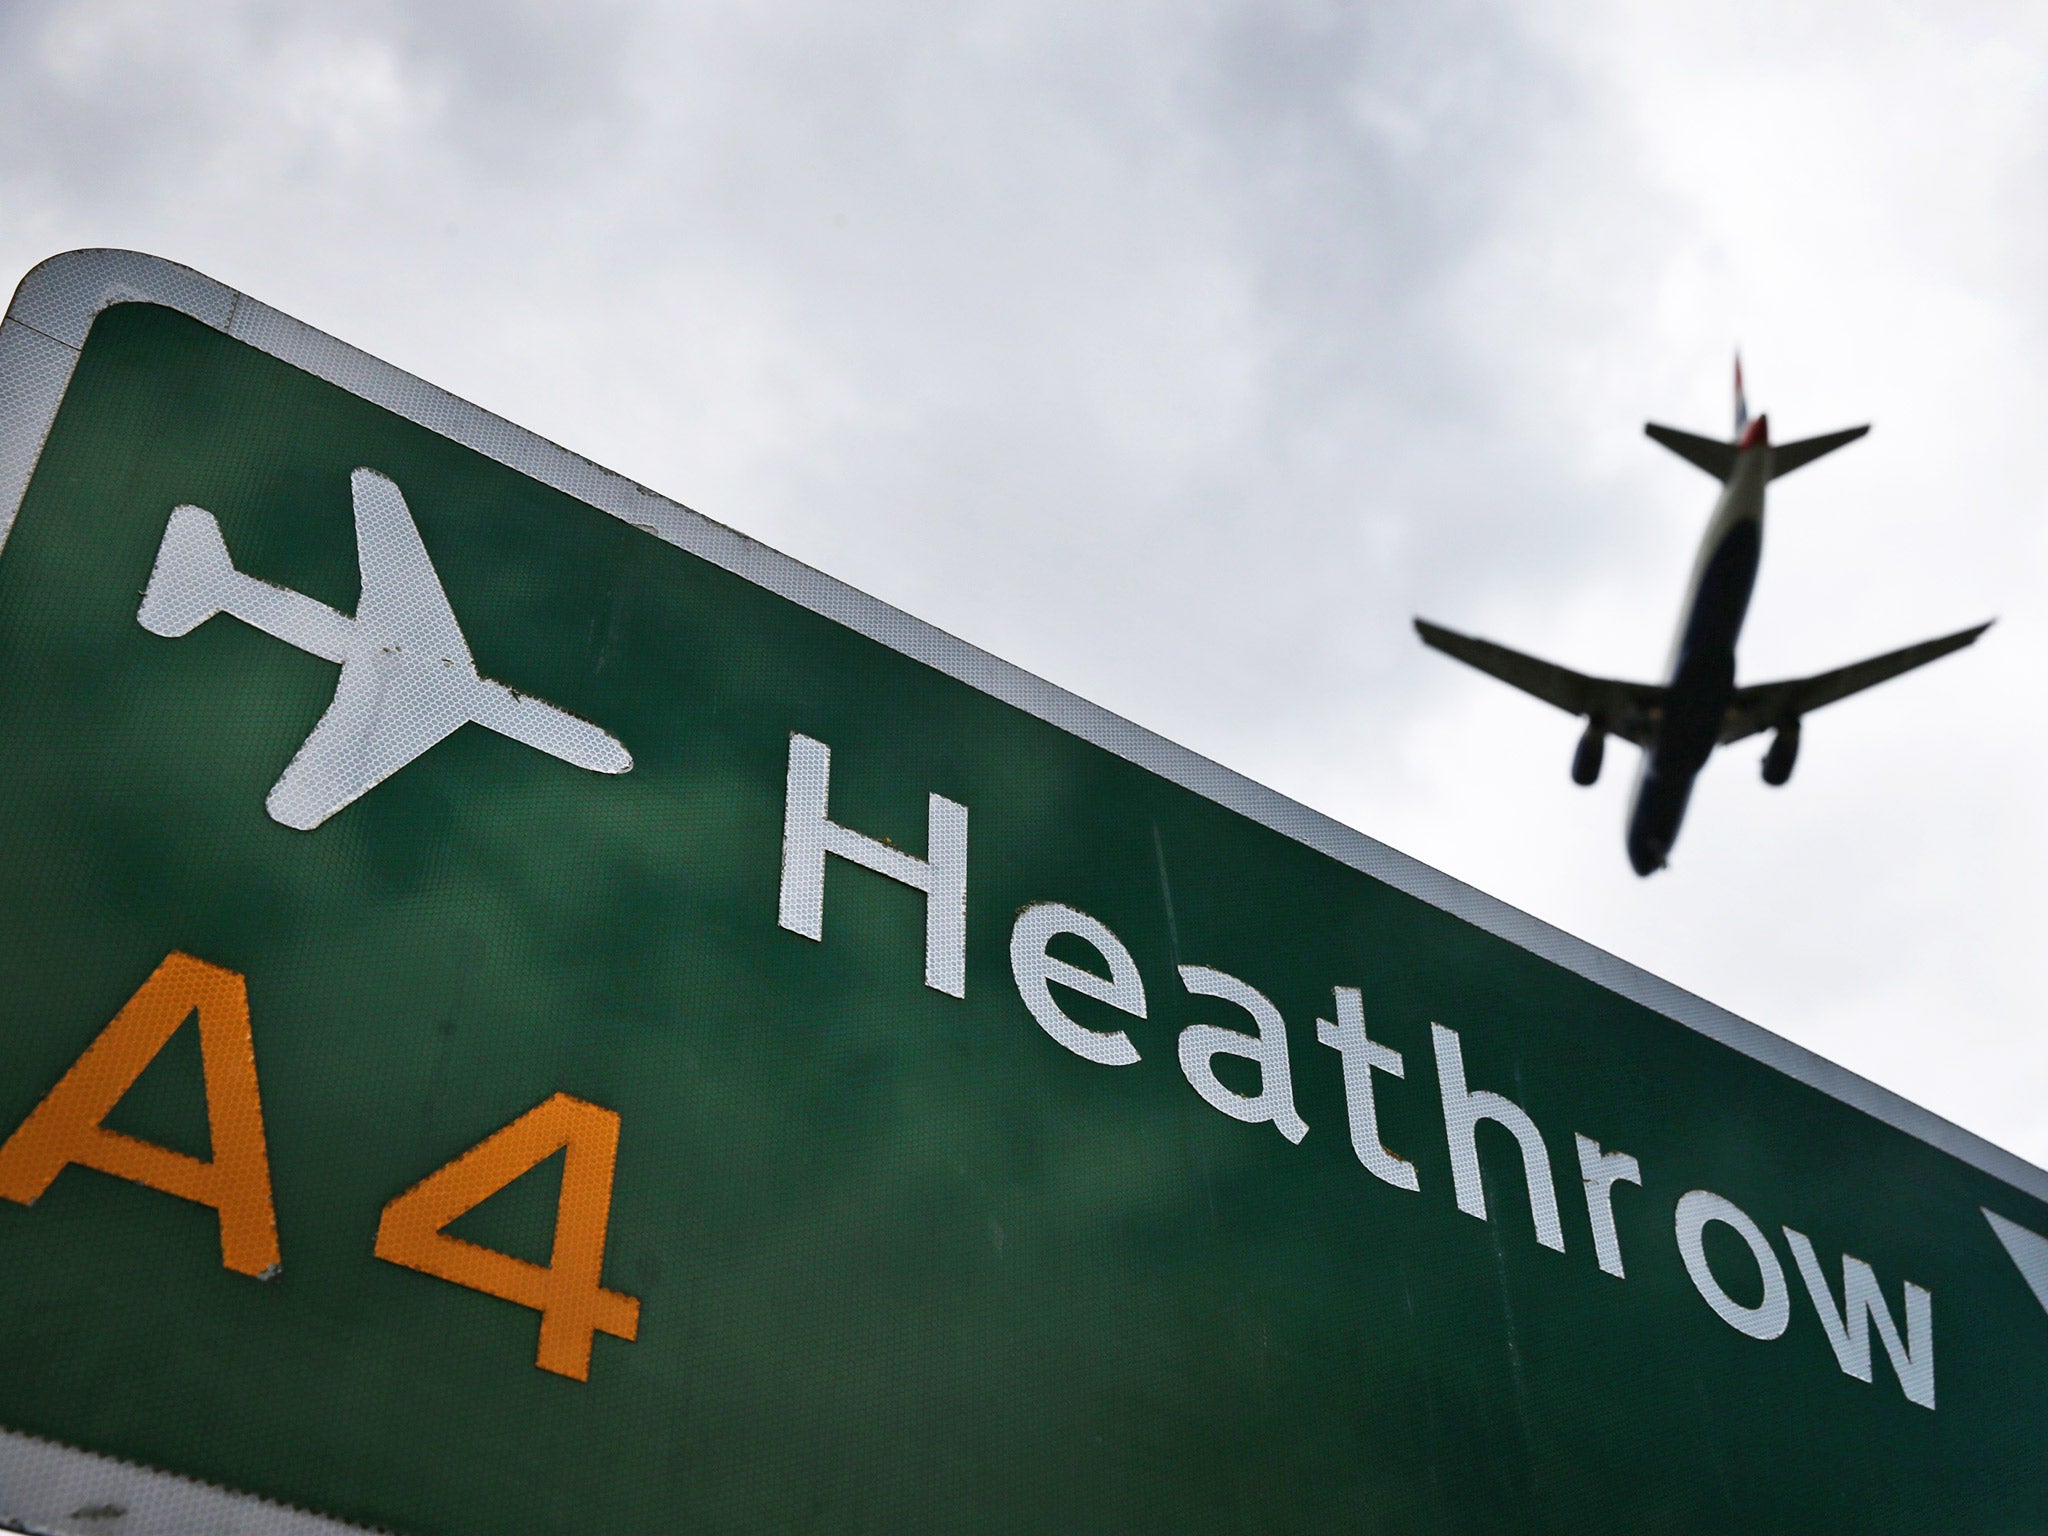 Building a third runway at Heathrow would increase the annual number of flights from 480,000 to 740,000